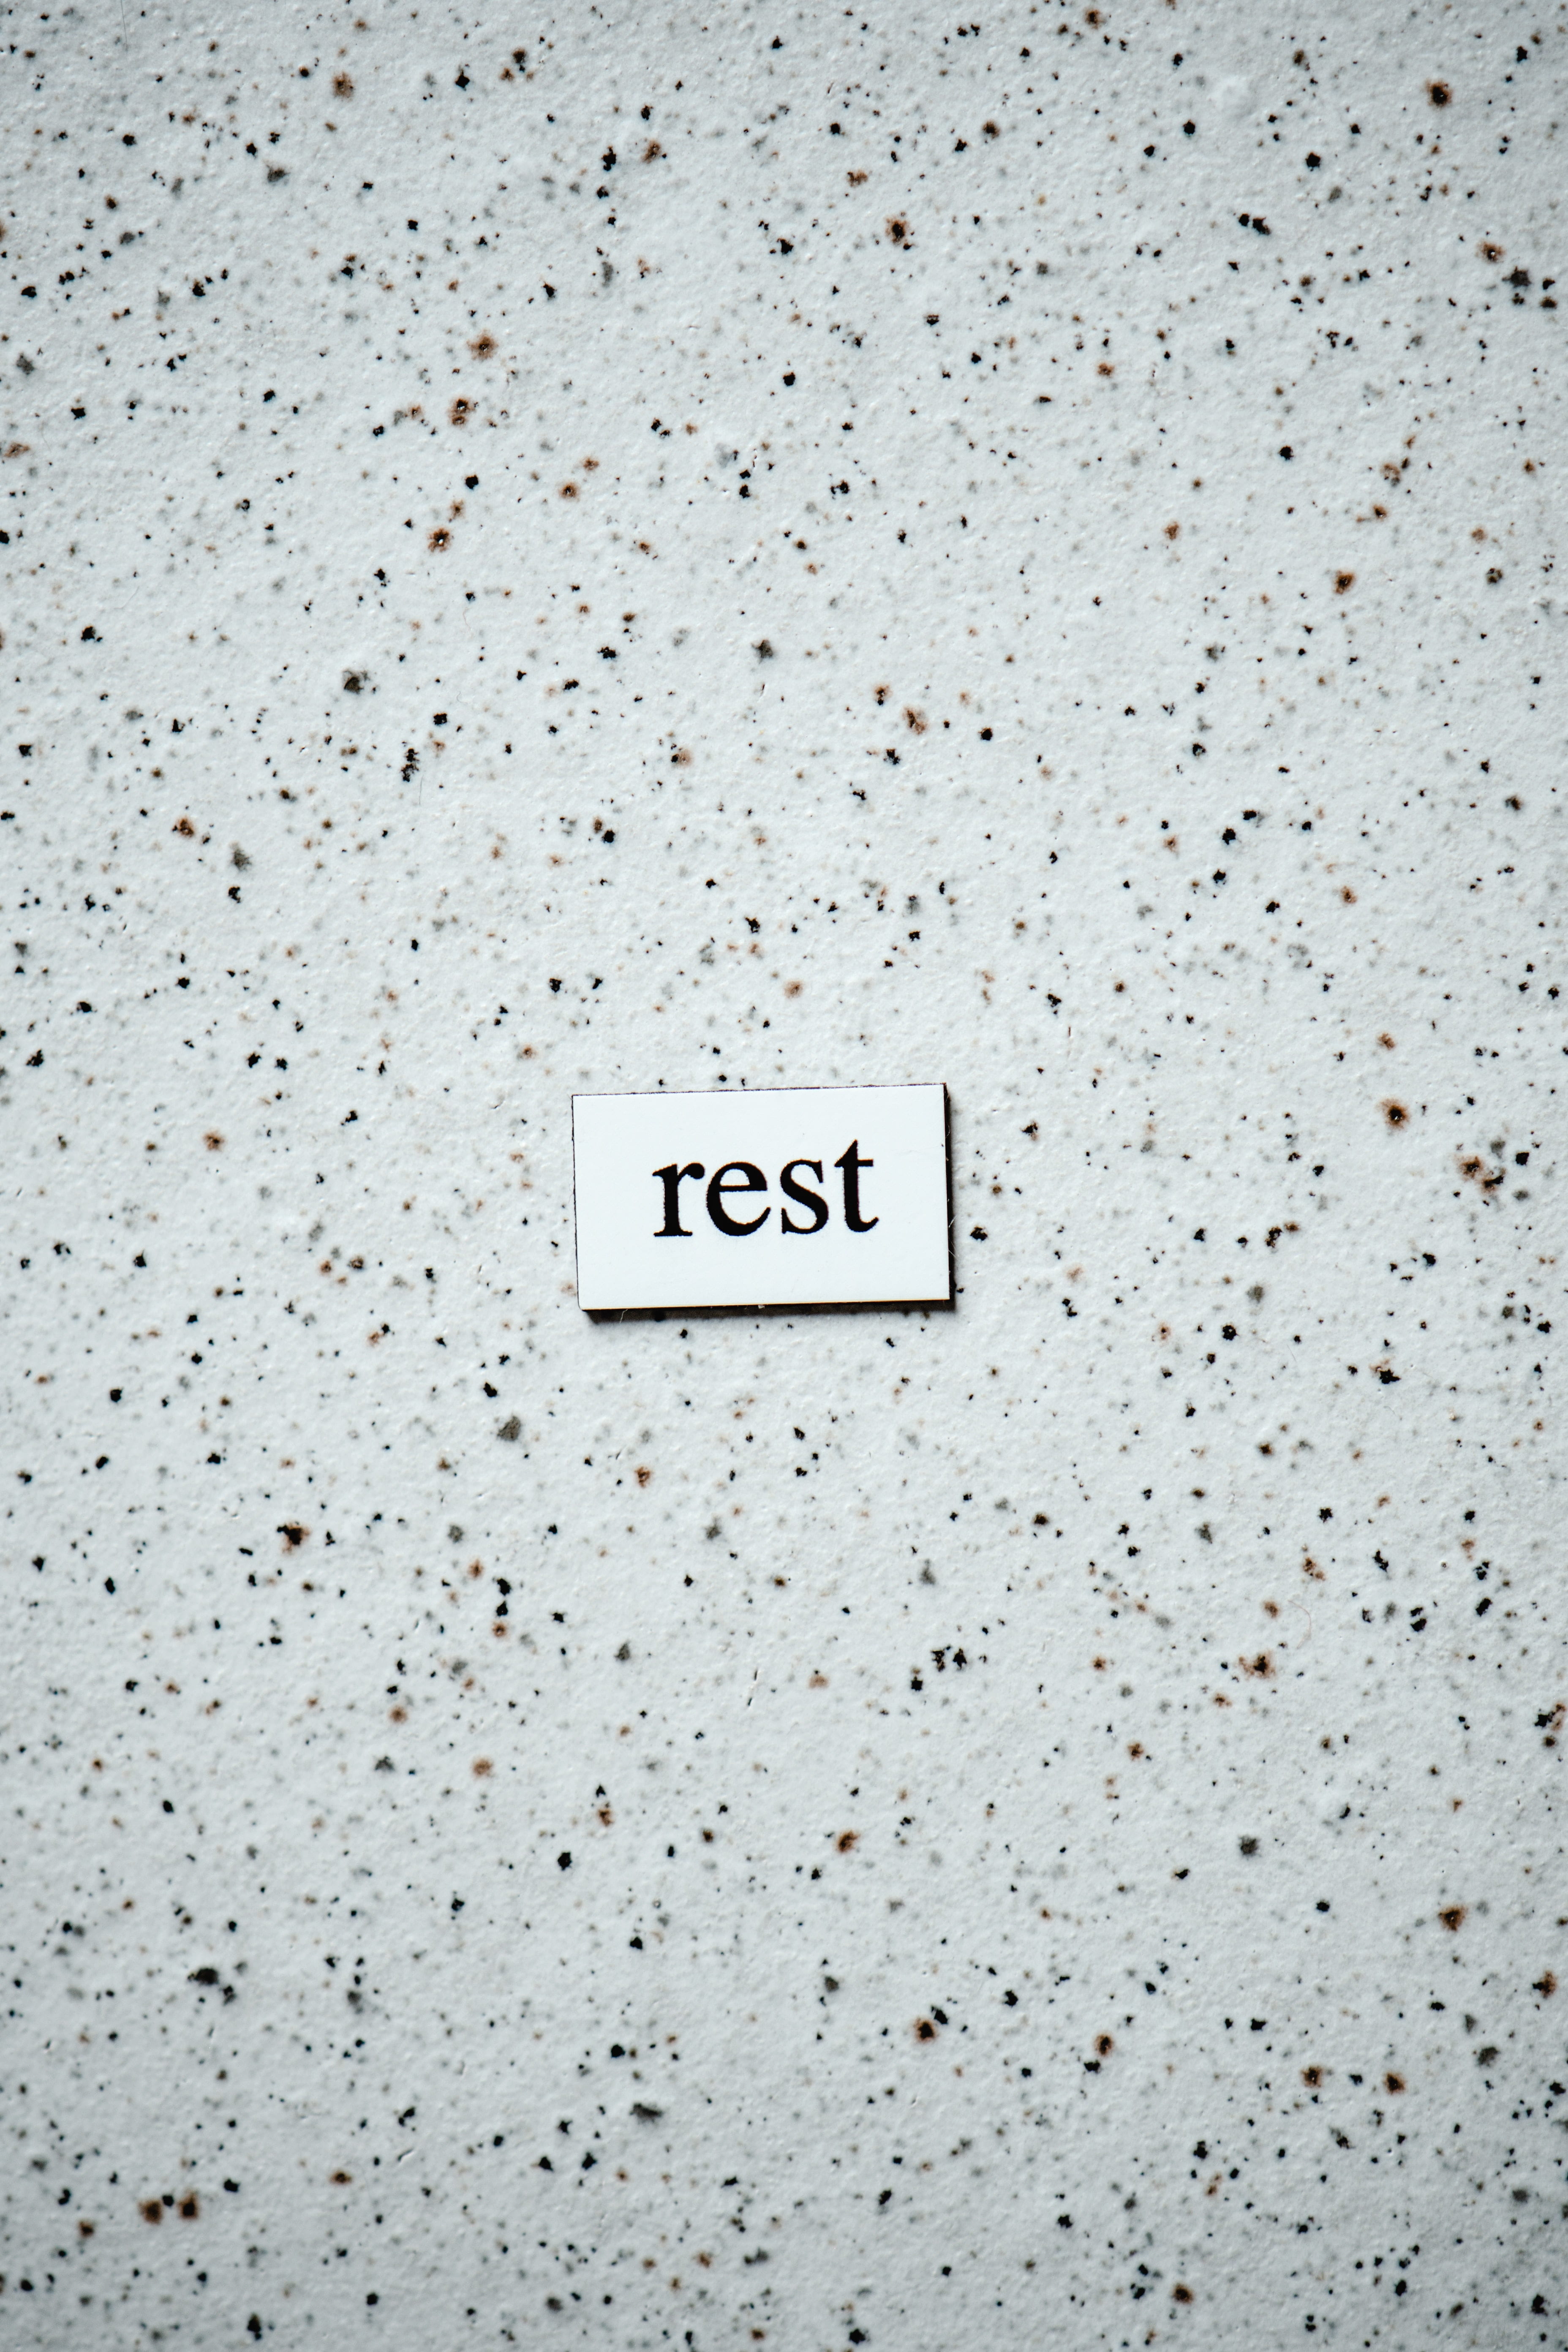 The small white square with the word 'rest' on a background of a white surface dappled with brown and black spots.